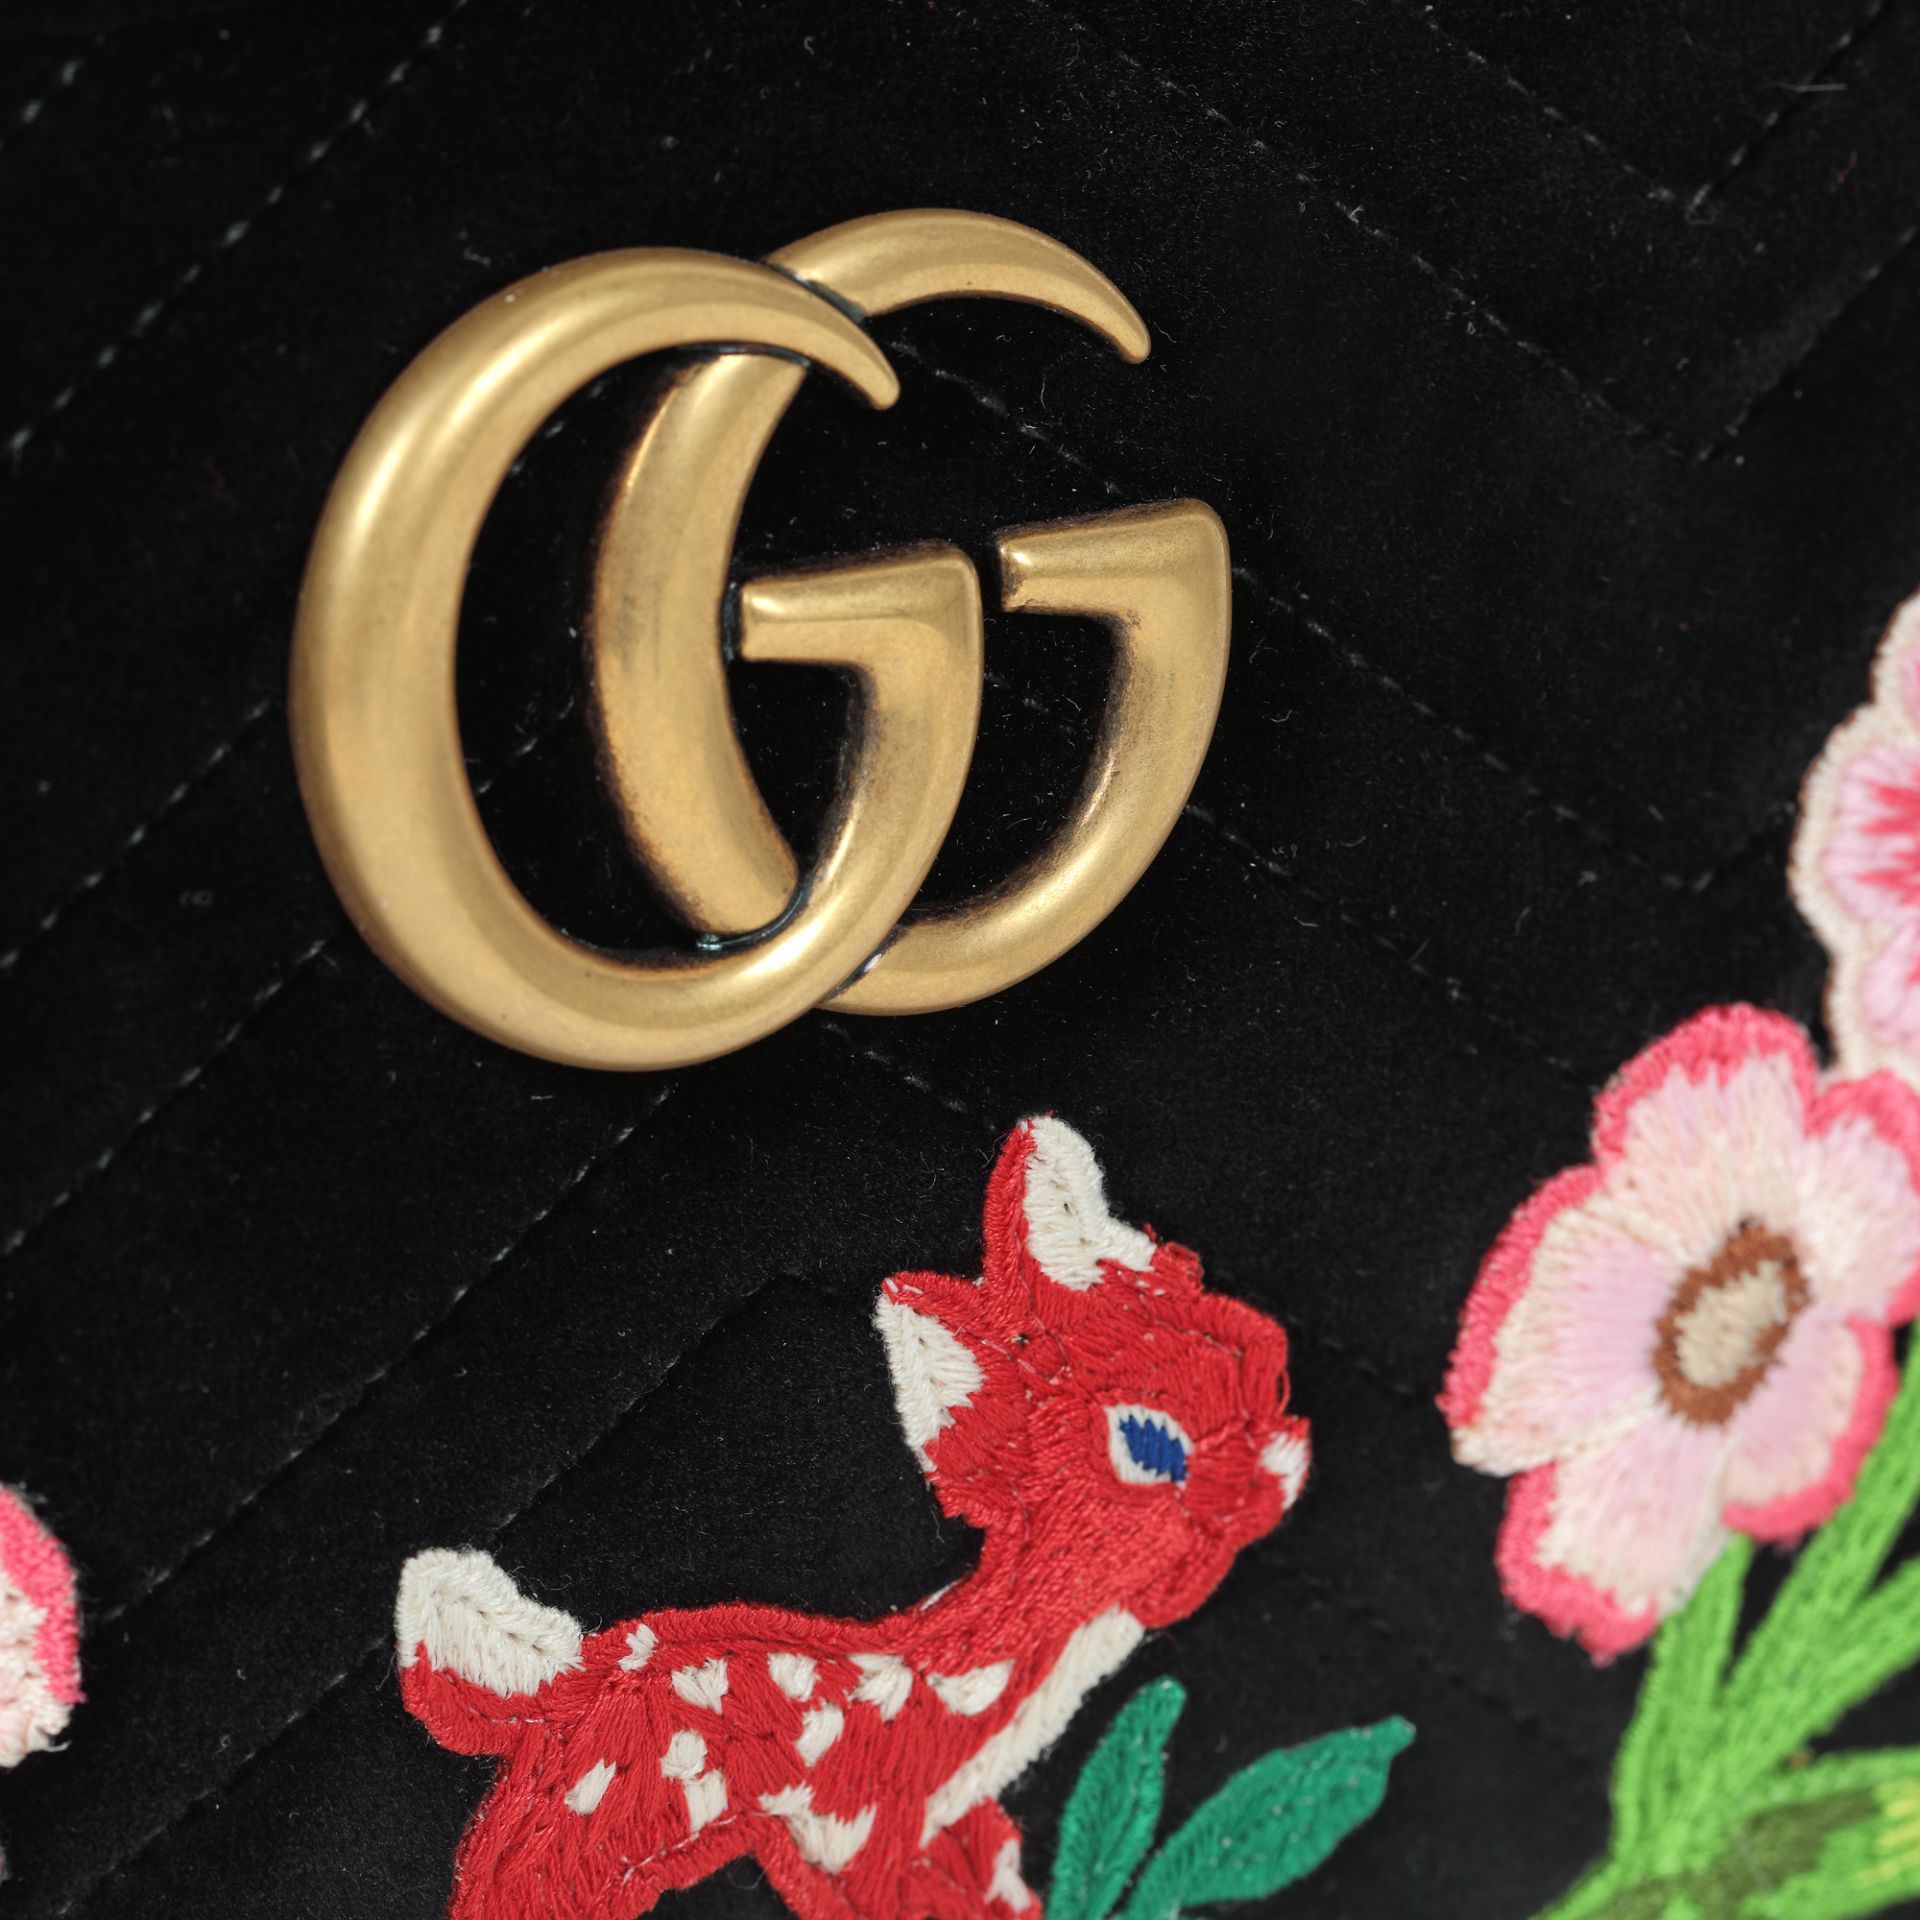 "Marmont Bambi" - Gucci bag, quilted velvet, black, embroidered elements - Image 3 of 4